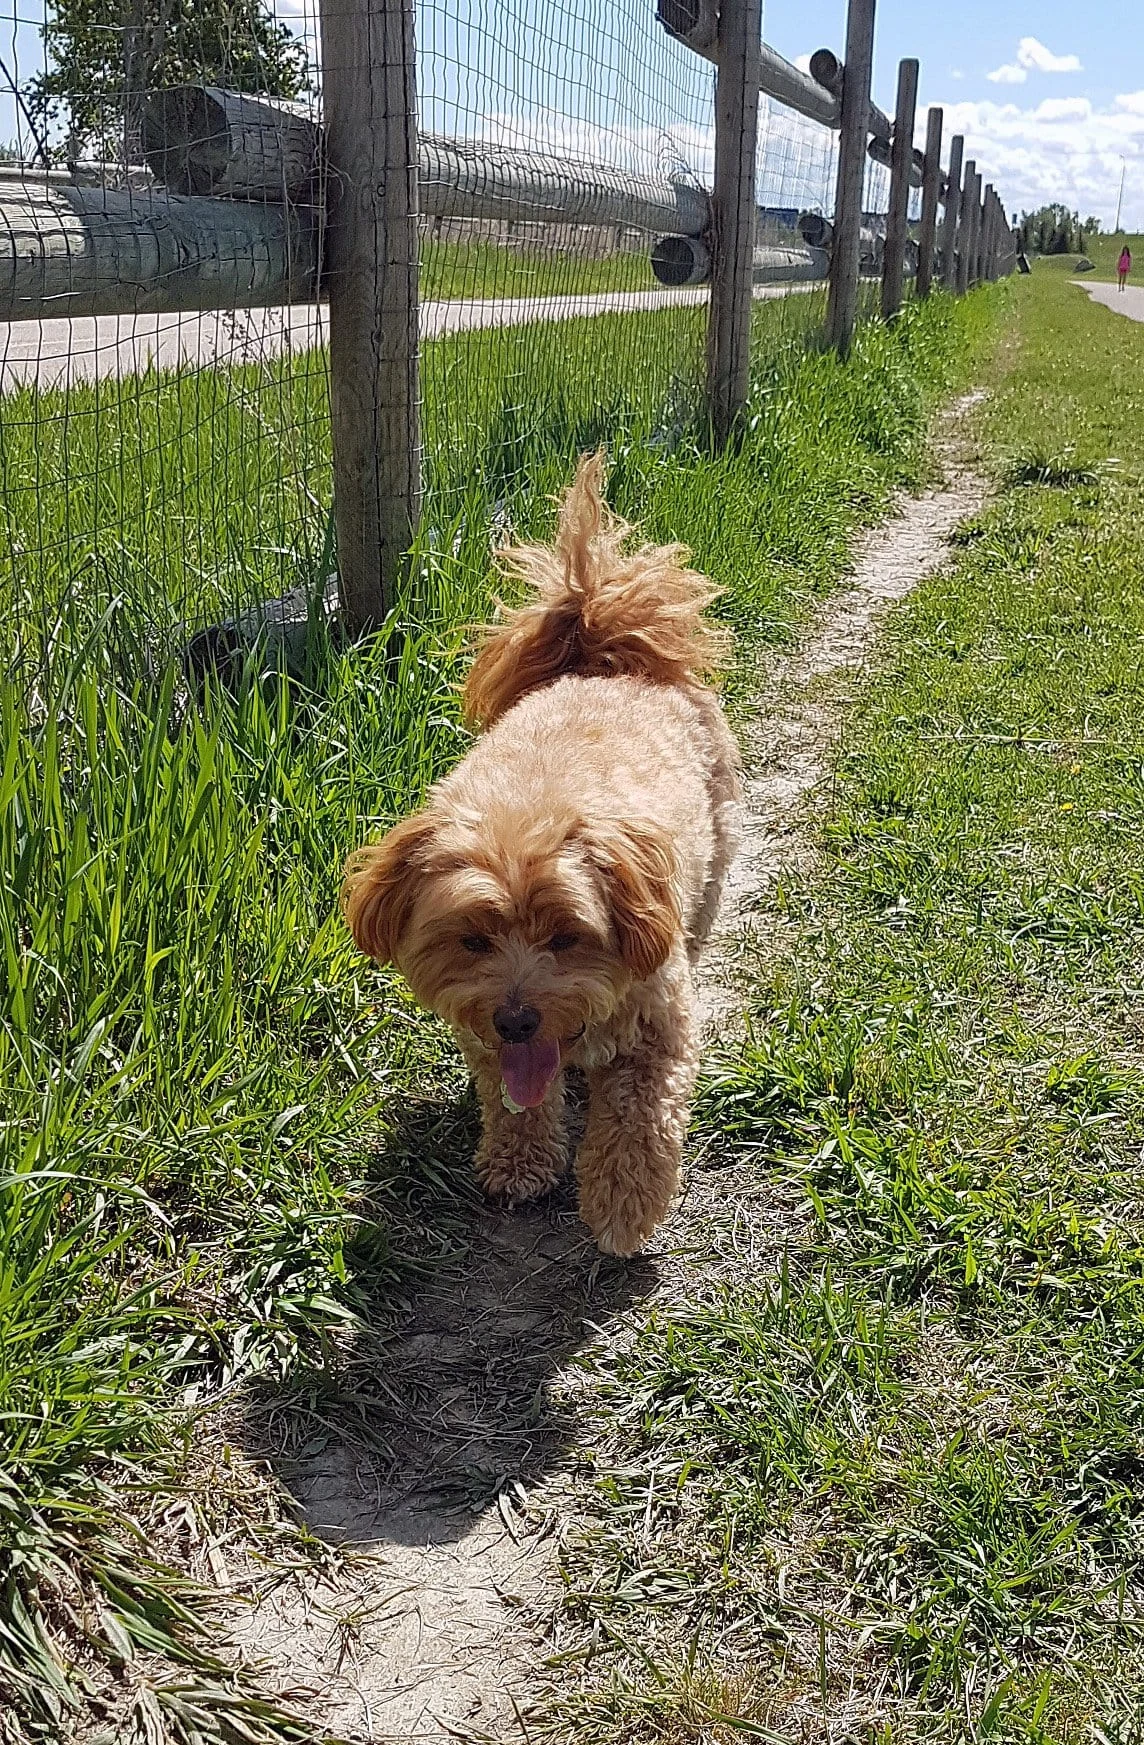 Fluffy small cute dog walking along a grassy path next to a wired fence.